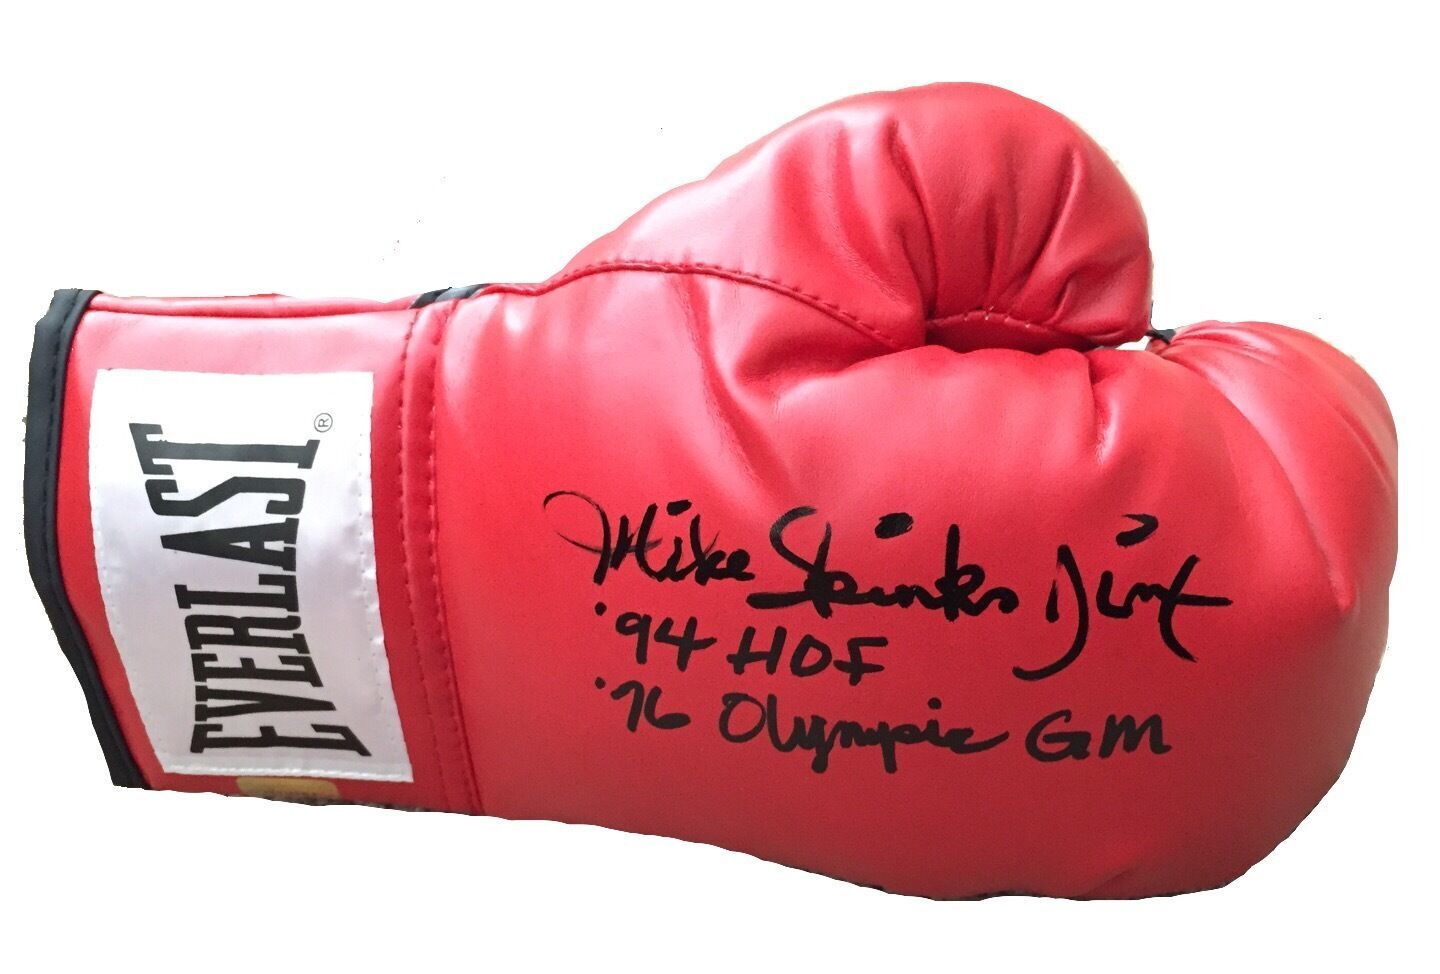 Michael Spinks Signed Glove Inscribed COA Inscriptagraphs Leon Boxing Mike Tyson - $118.96